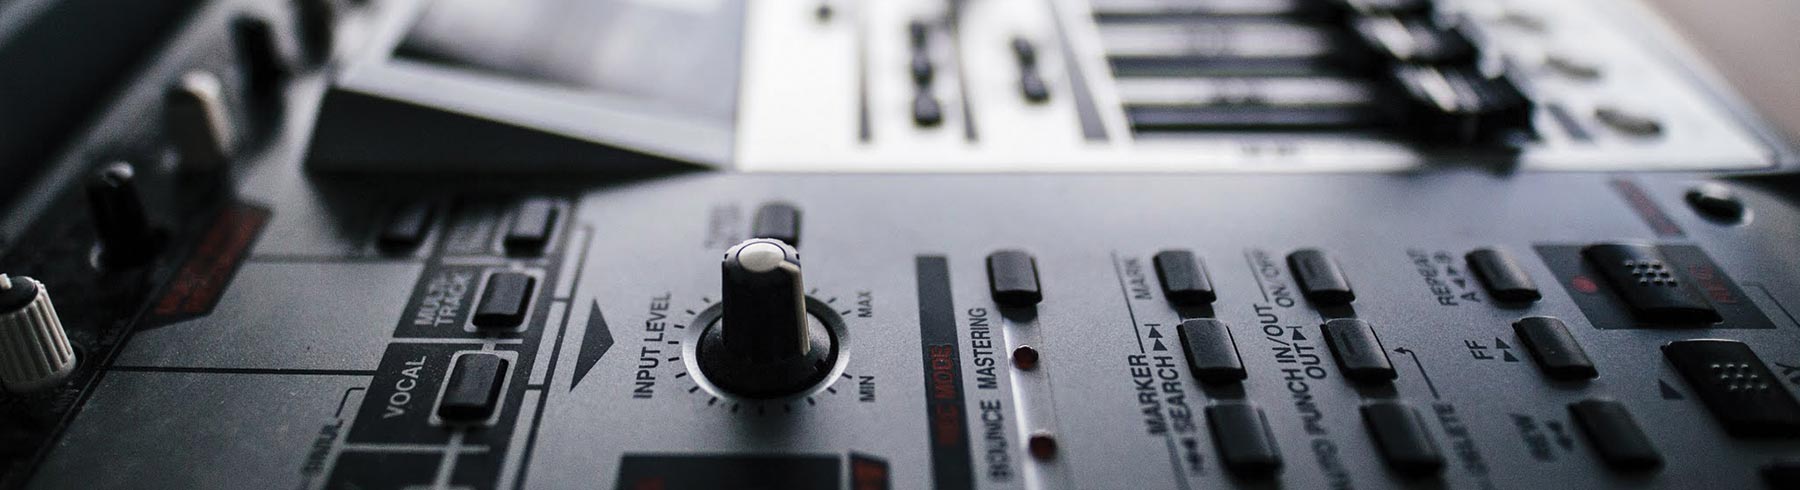 A closeup of the dials on a mixing deck